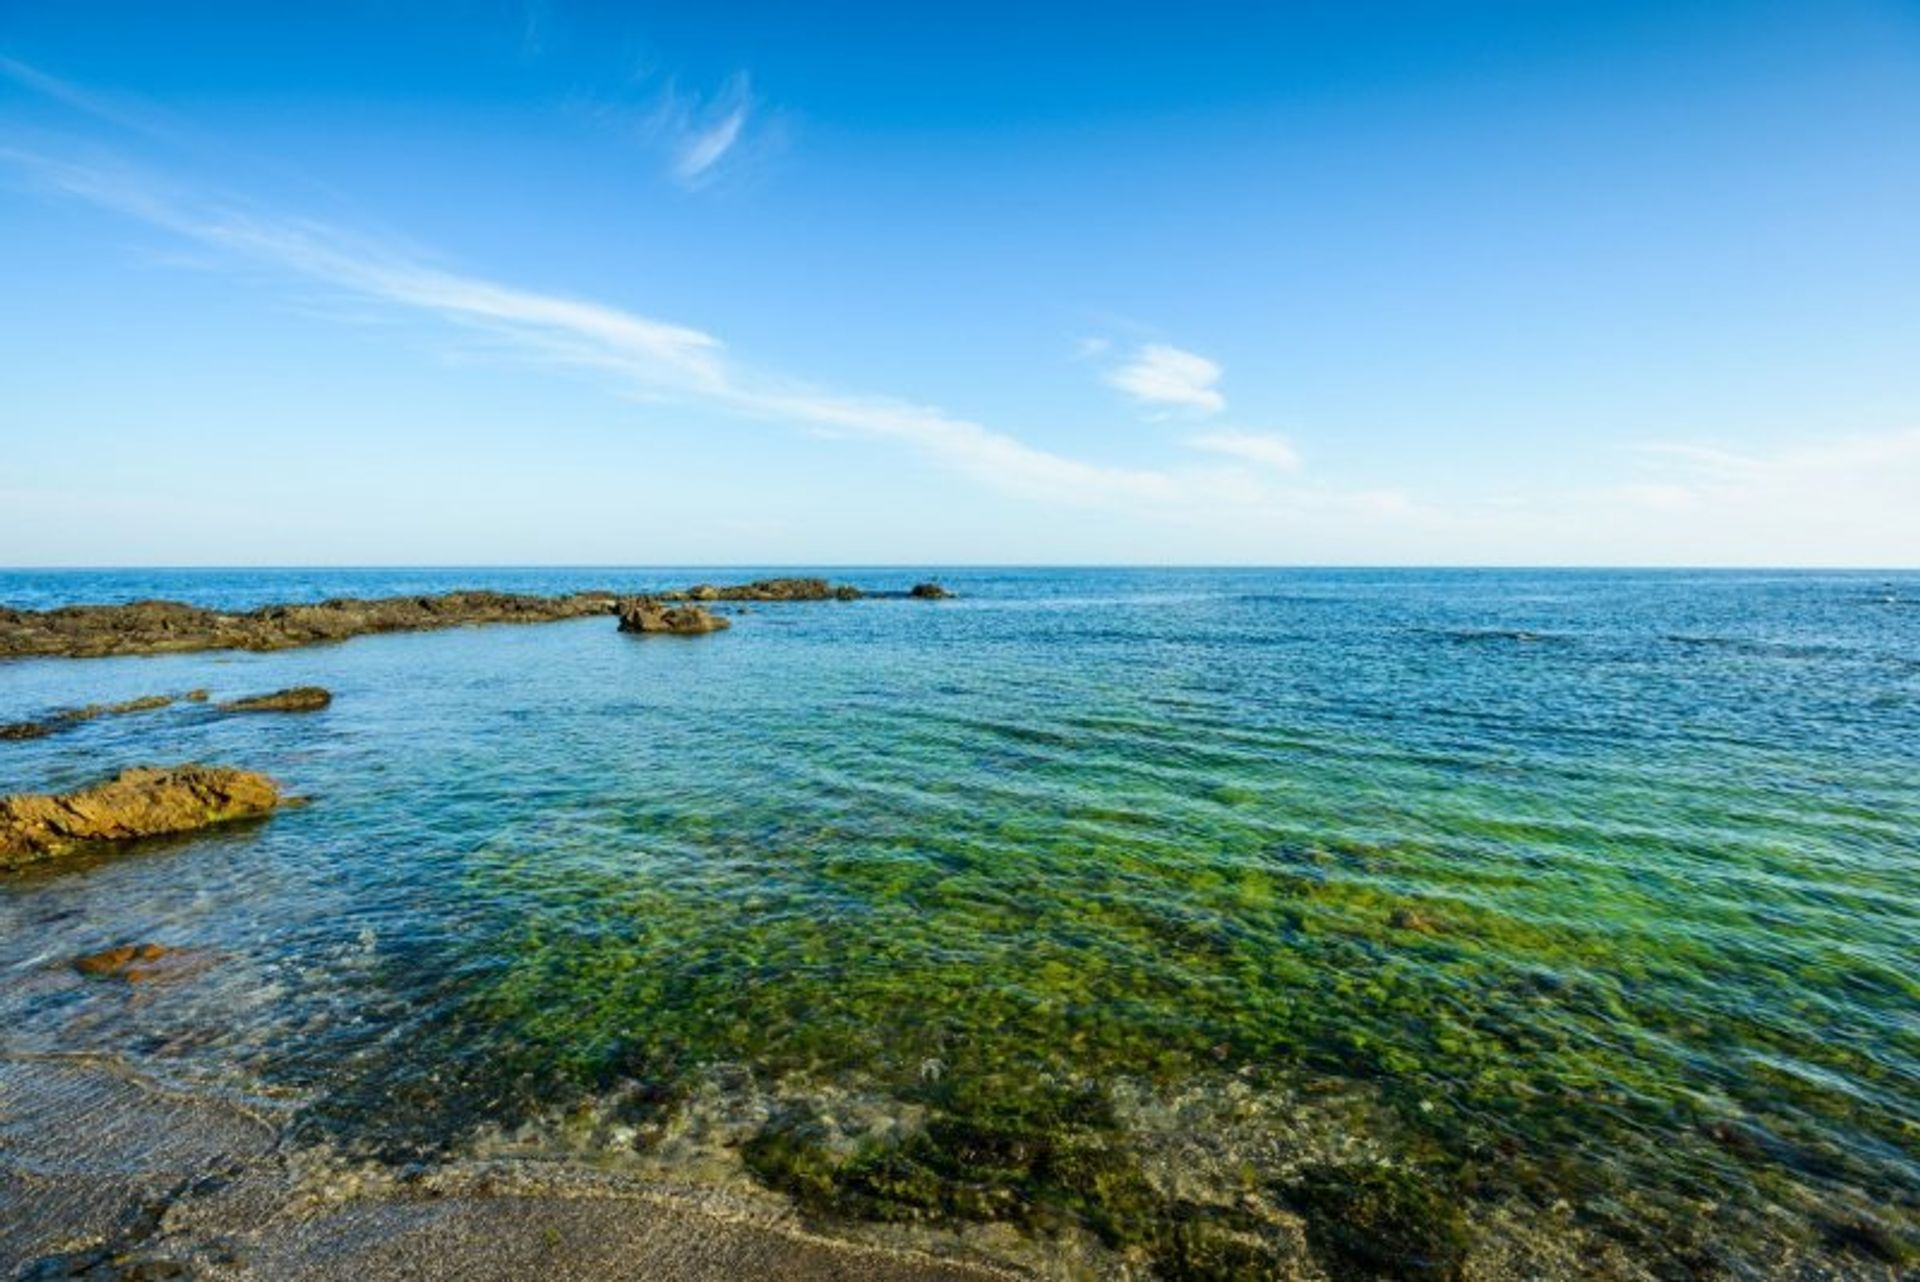 Boasting crystal-clear azure waters and fine sands, Calahonda beach is a favorite with families